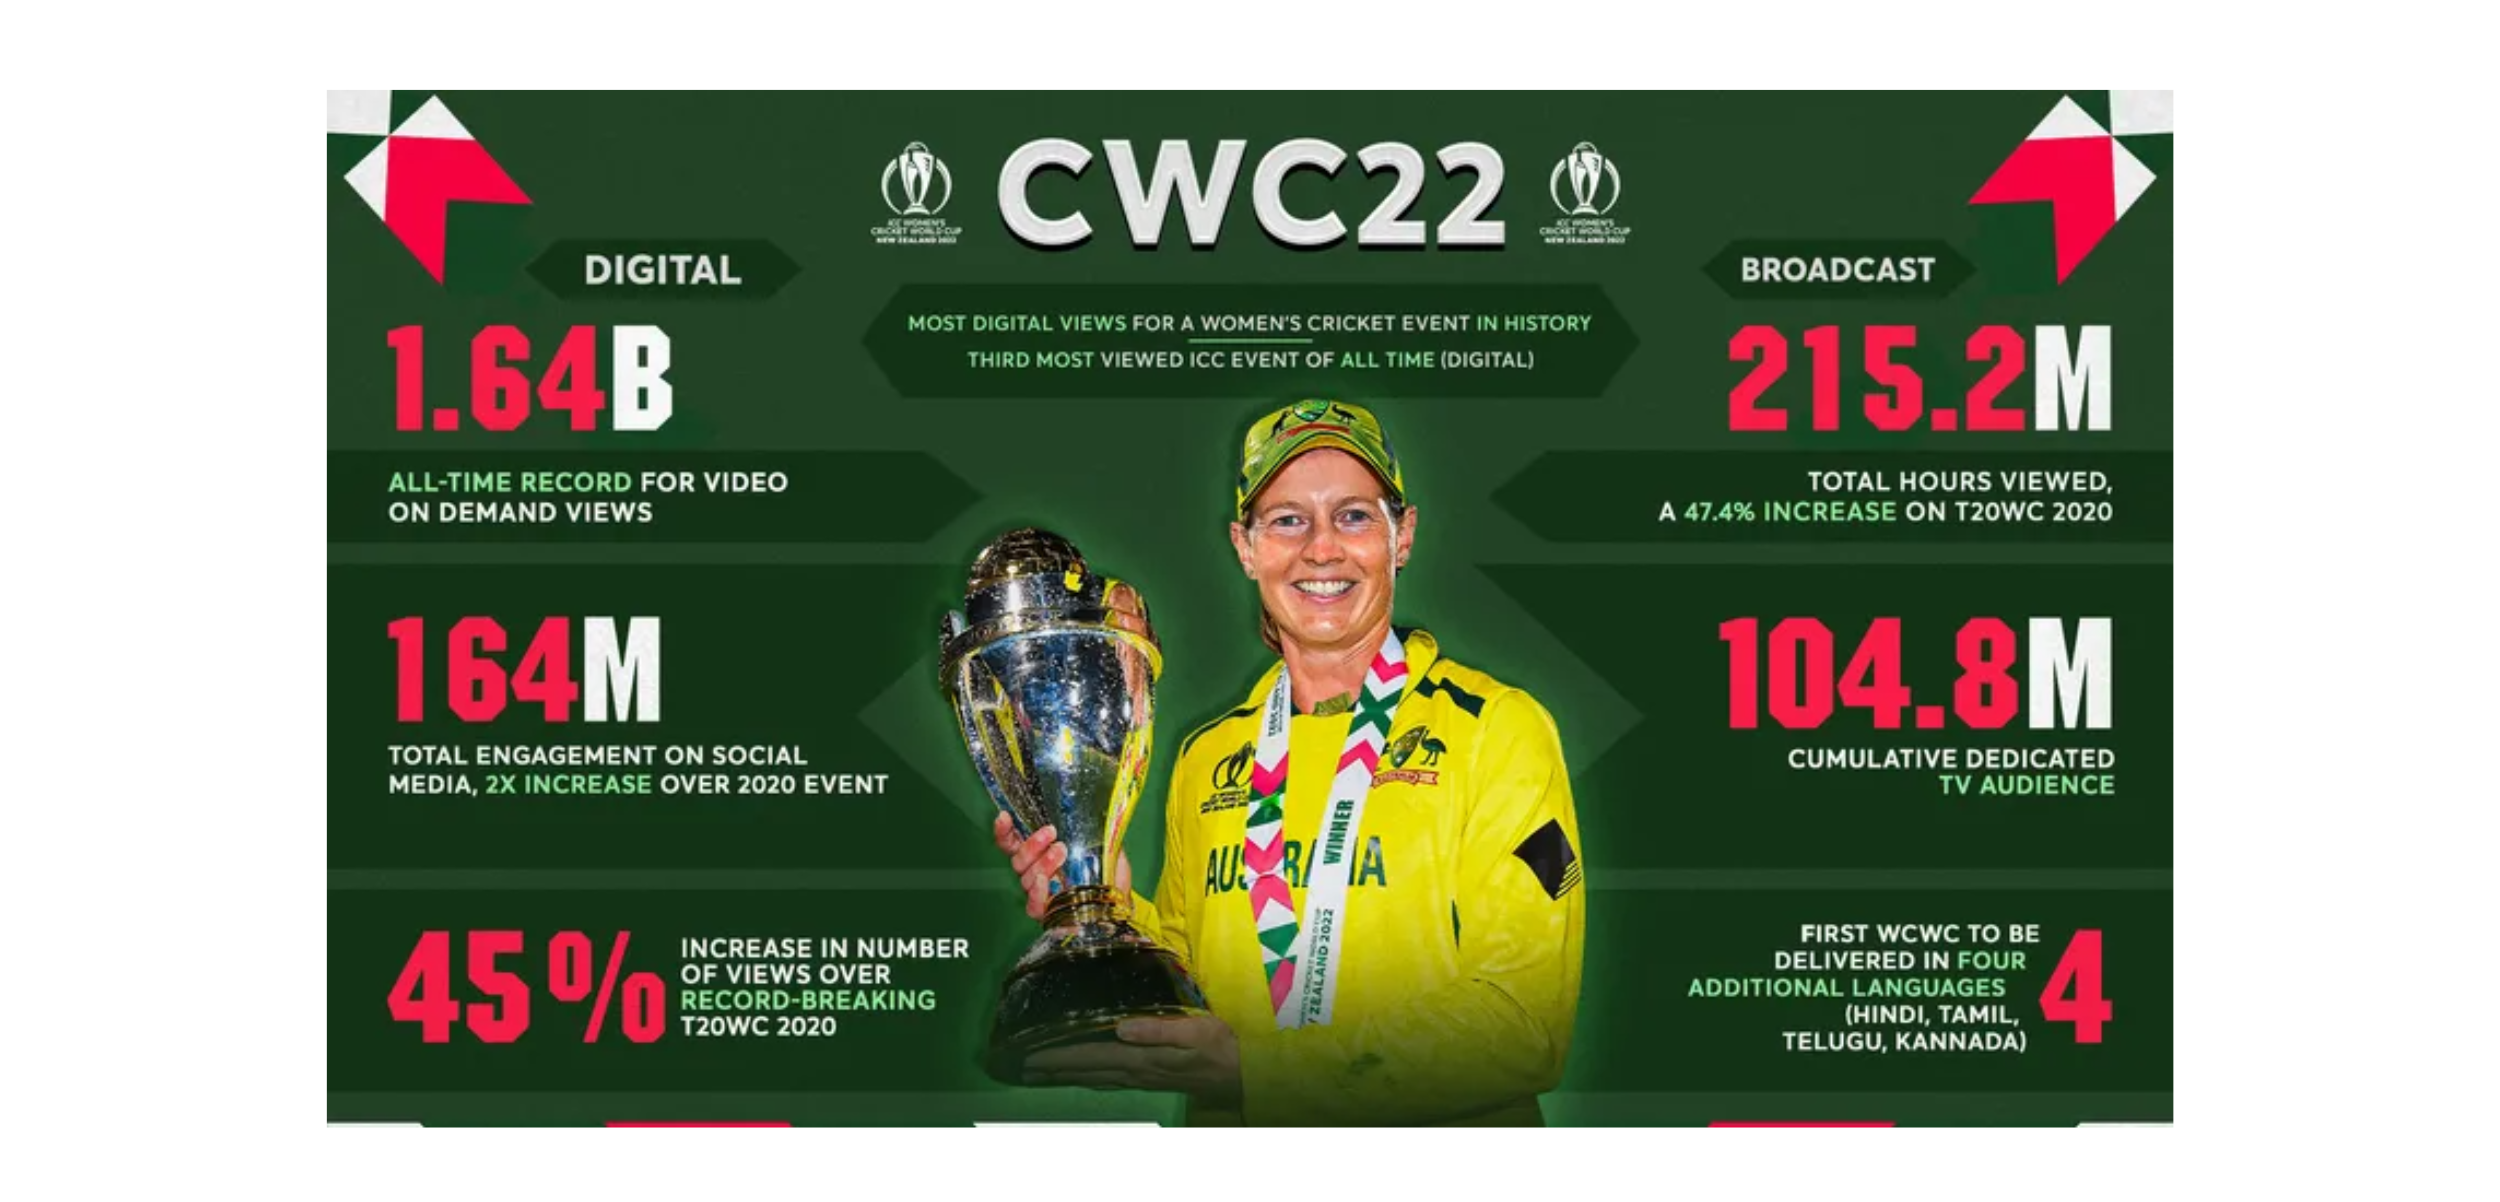 ICC Women’s Cricket World Cup 2022 sets new digital engagement benchmark